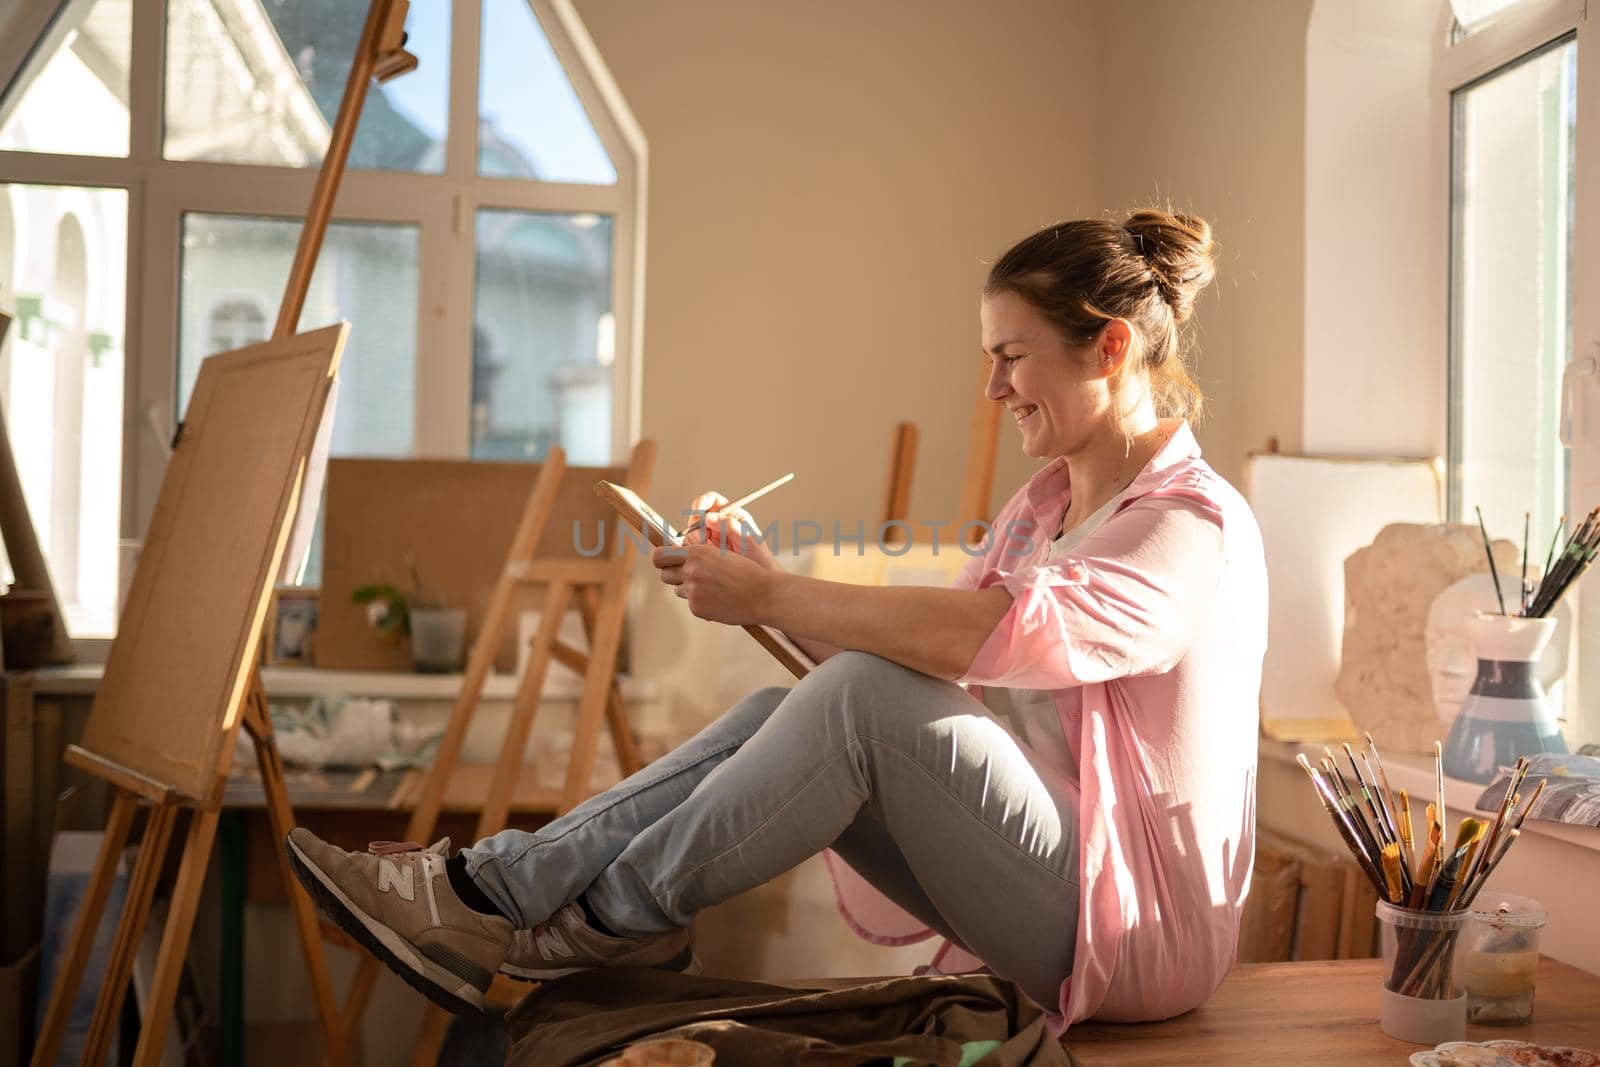 Cute woman paints on canvas in an art workshop. Artist creating picture. Art school or studio. Work with paints, brushes and easel. Hobby and leisure concept. Woman painter at workspace.